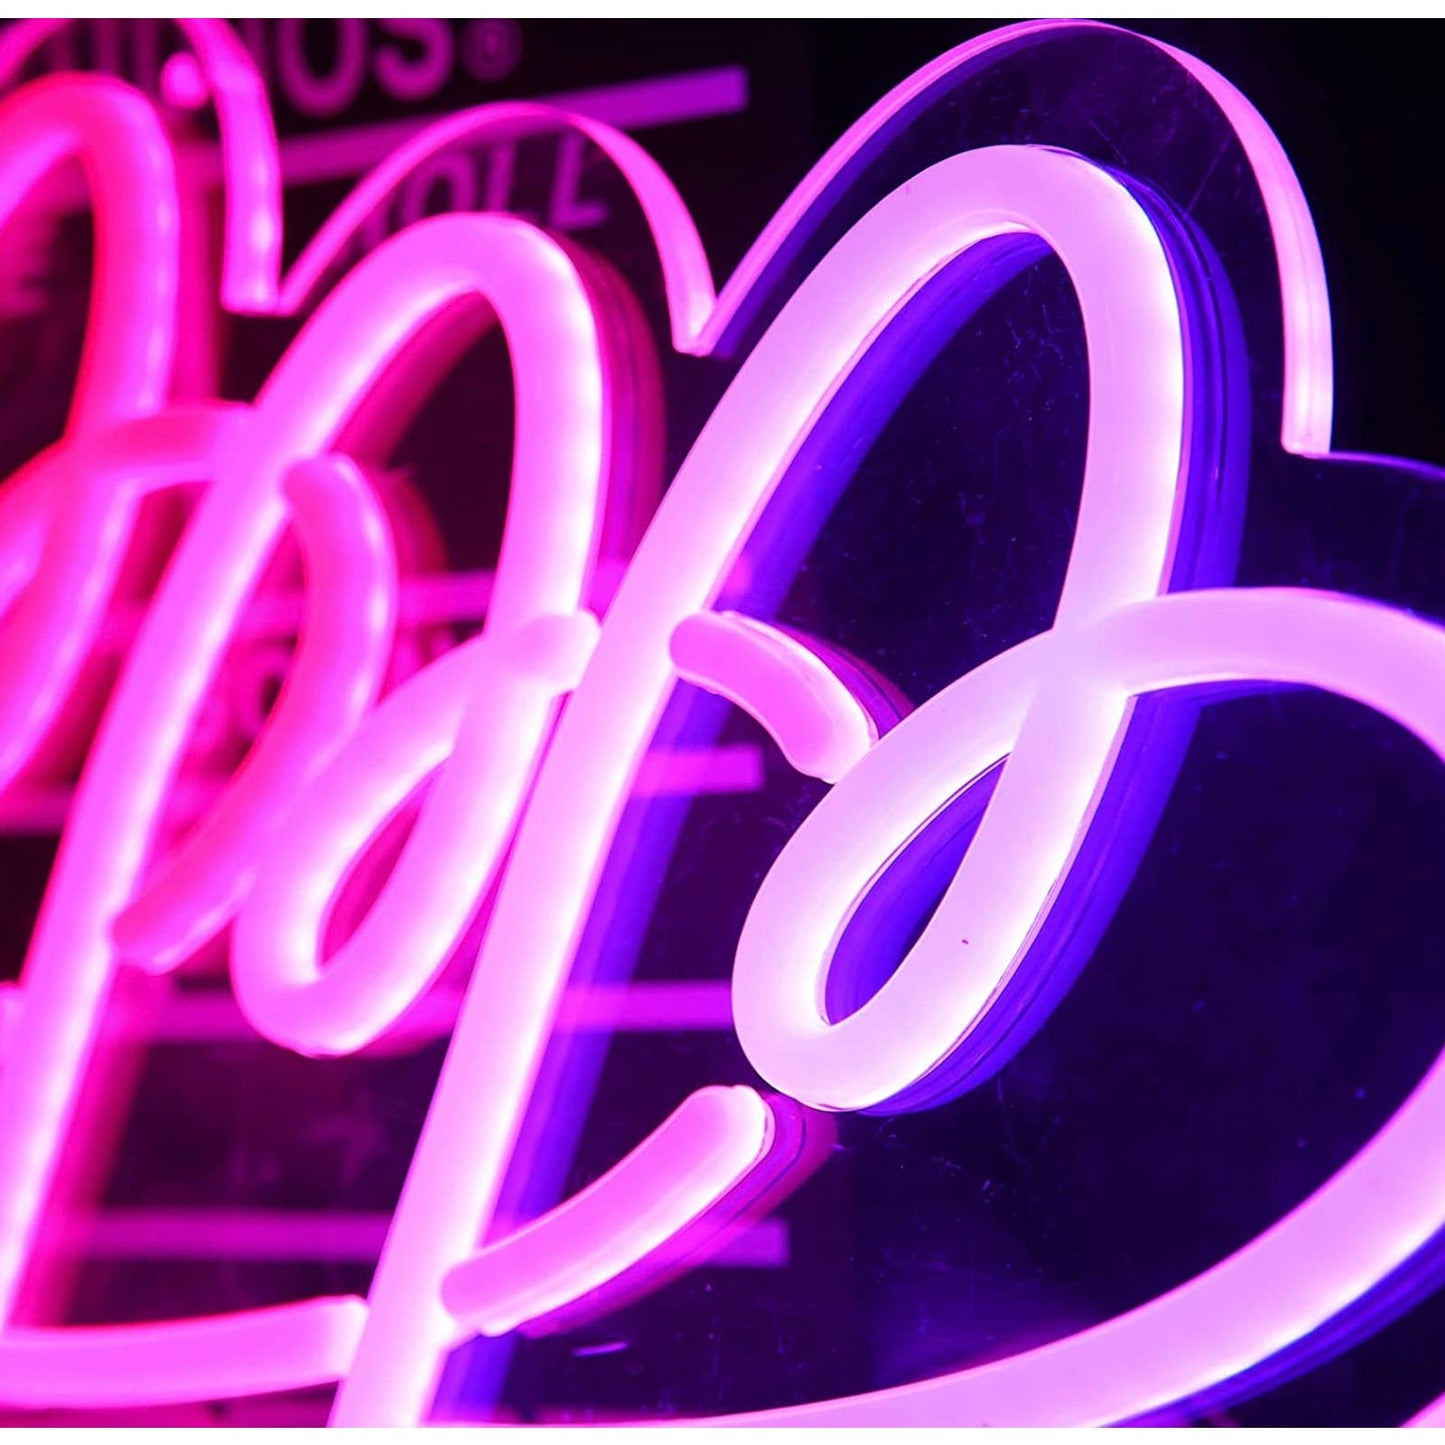 Adorable Bright Colorful Triple Heart Loop LED Love Light Sign Room Wall Decor